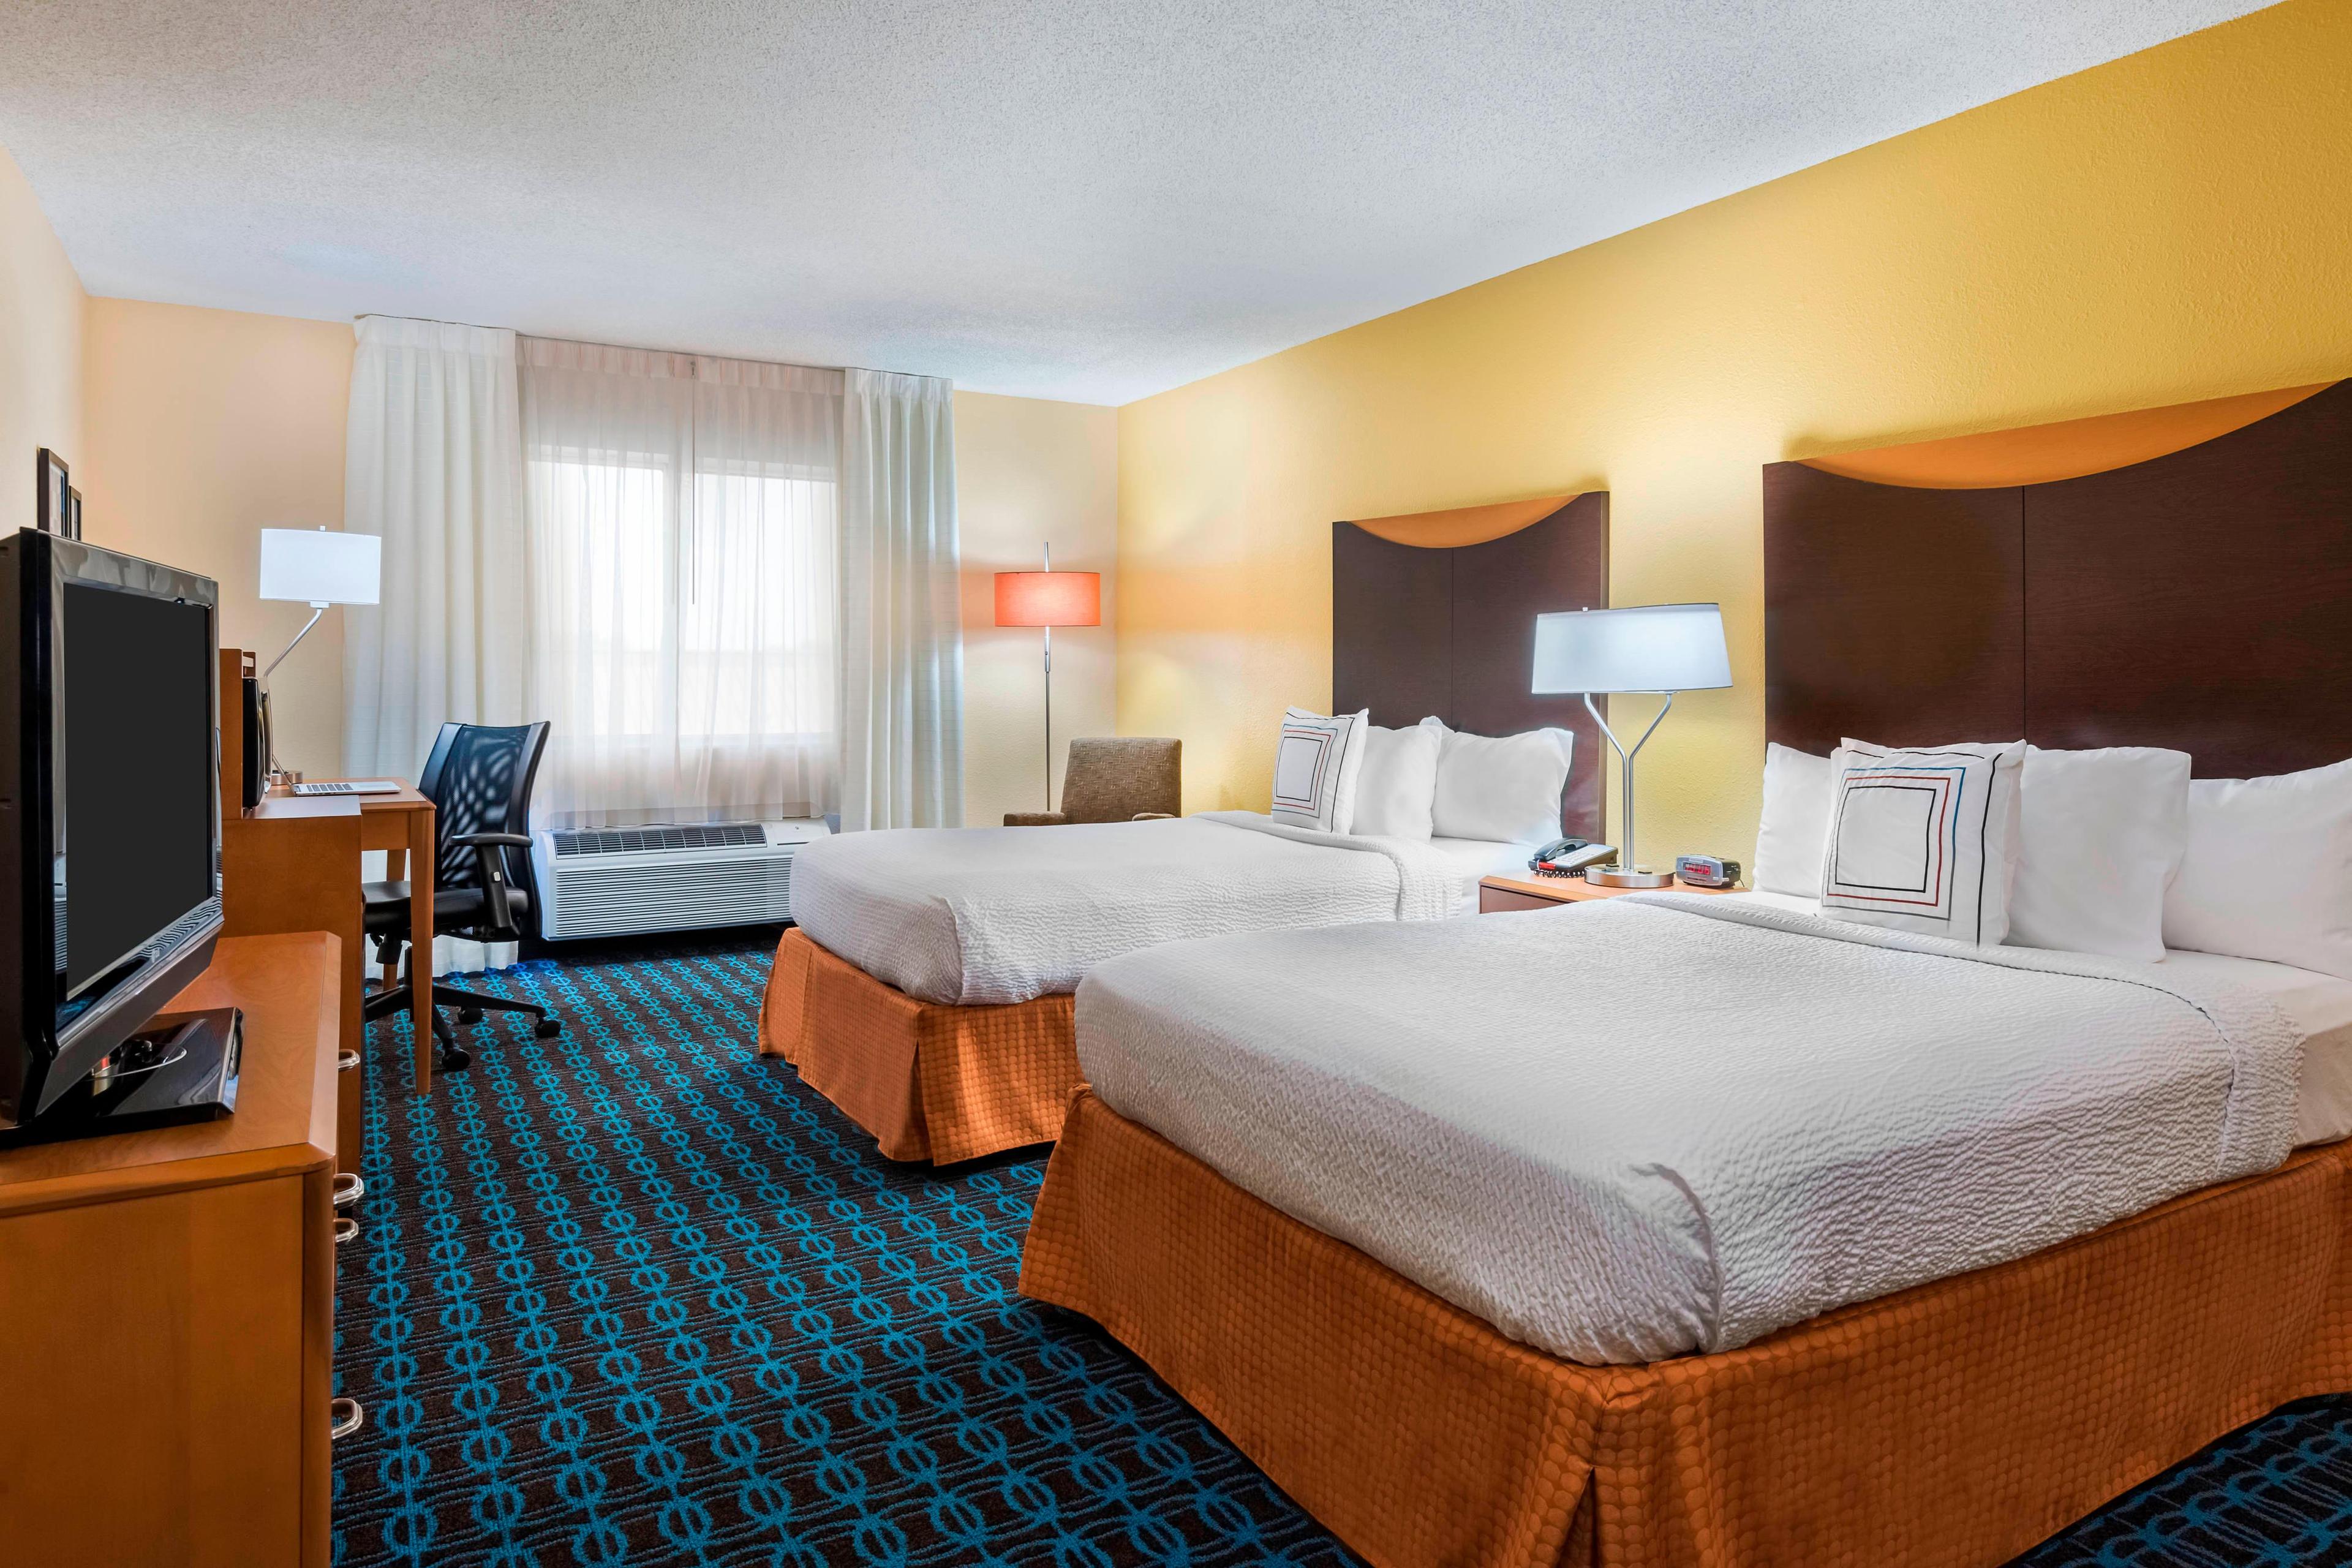 Traveling with family? Try our spacious double/double guest rooms with two comfy queen-size beds, a large desk and ergonomic chair for comfort, high-speed wireless Internet access and plenty of room for the family to stretch out, relax and enjoy their stay in Mobile.